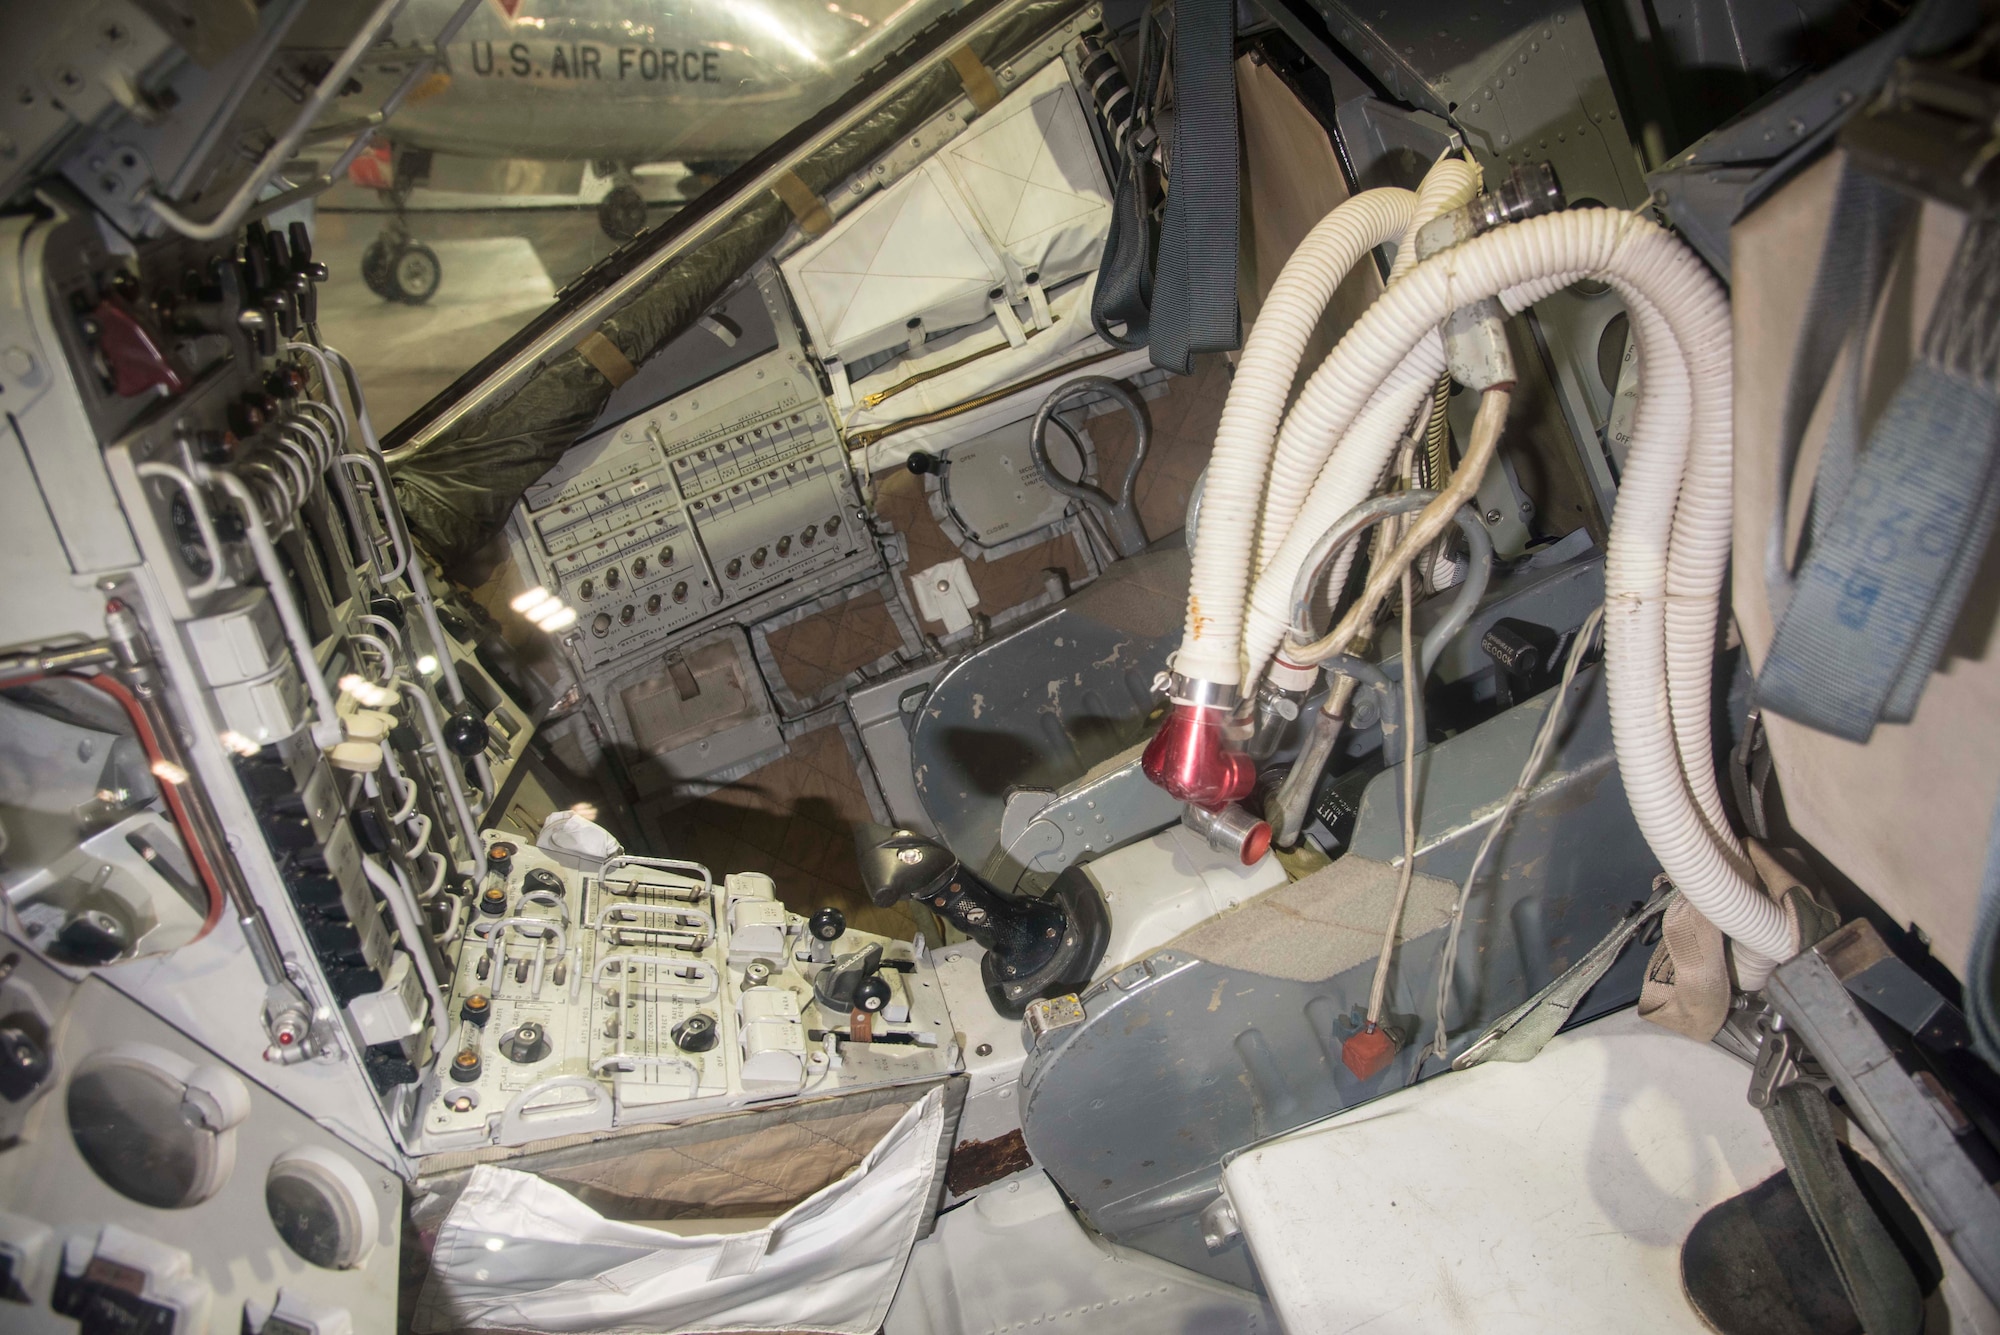 DAYTON, Ohio -- Gemini spacecraft (interior view) in the Space Gallery at the National Museum of the United States Air Force. (U.S. Air Force photo) 